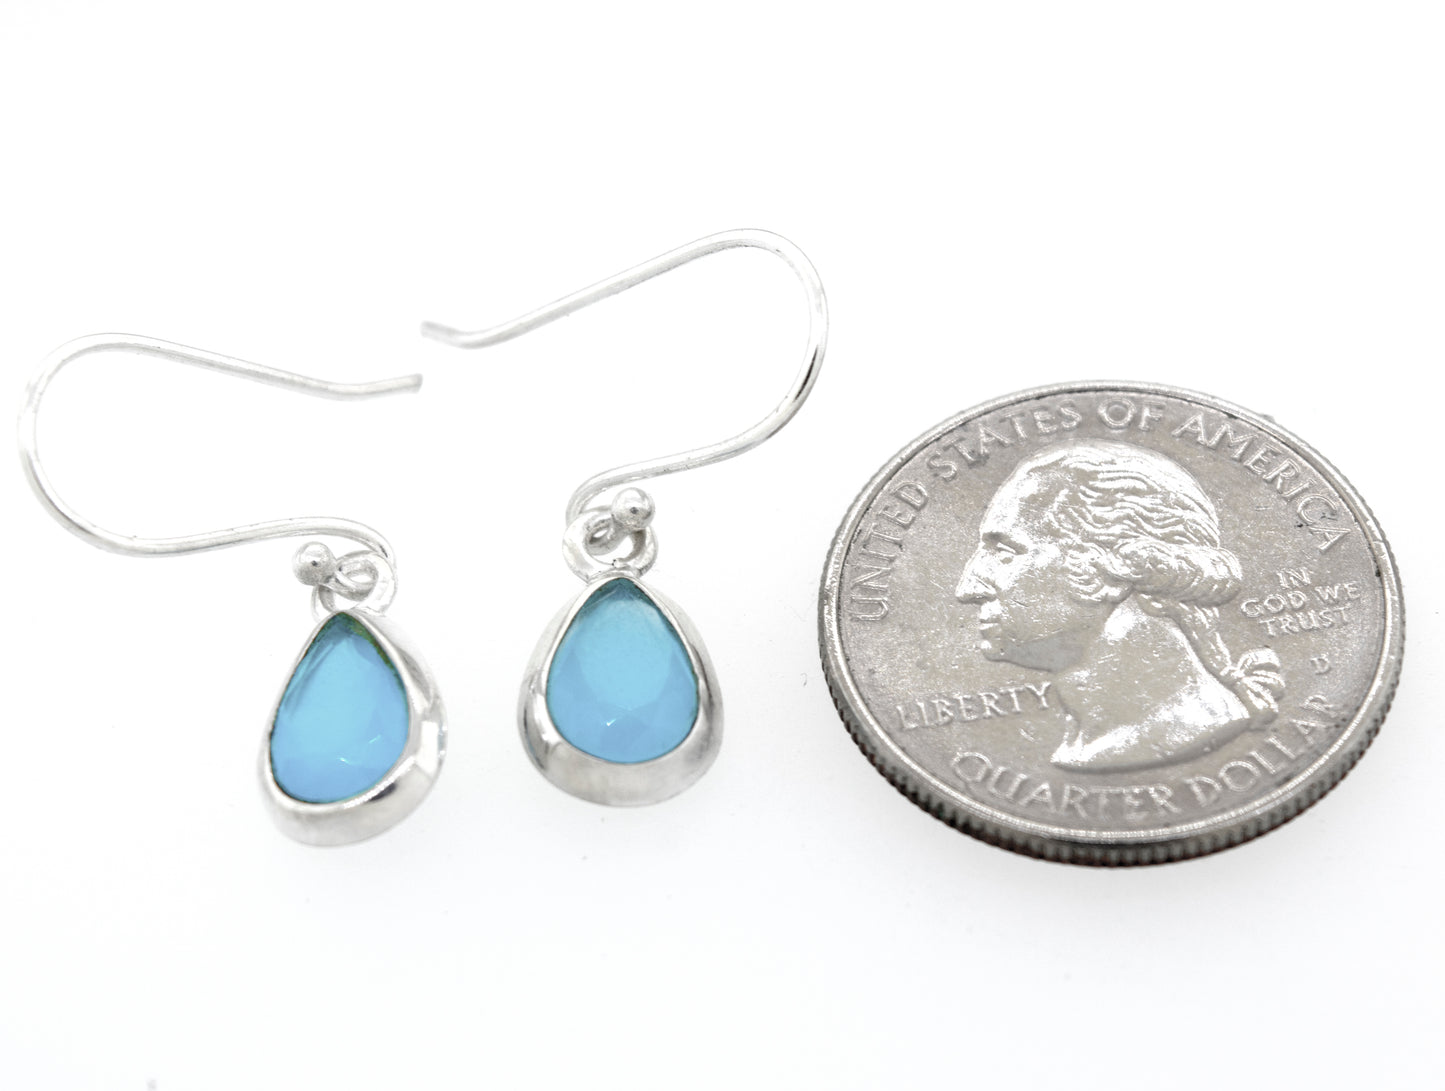 A pair of Simple Teardrop Shape Blue Chalcedony Earrings by Super Silver with a blue opal stone in a sterling silver setting.